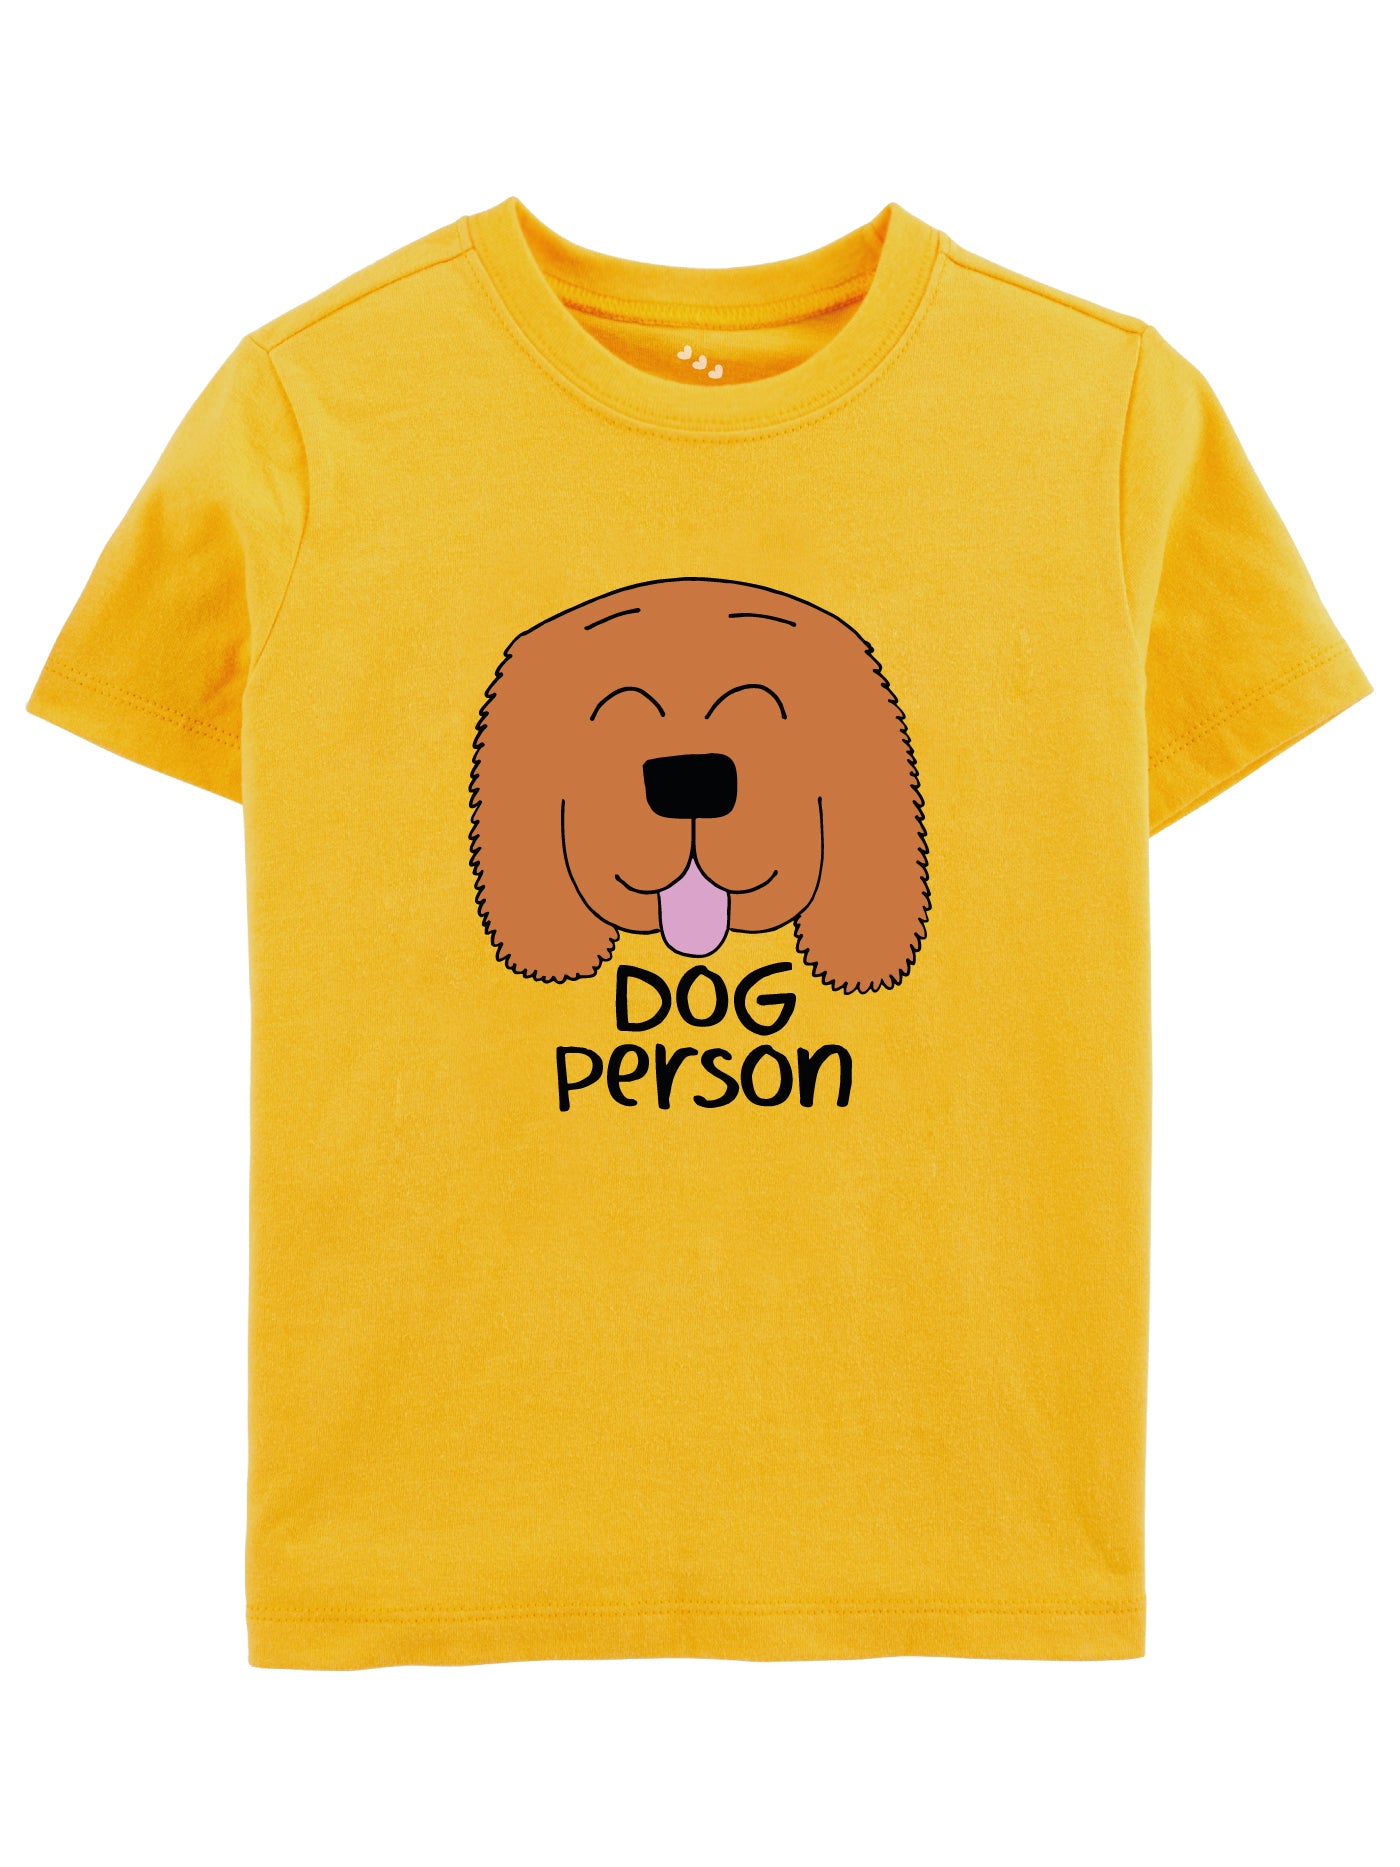 Dog Person - Tee